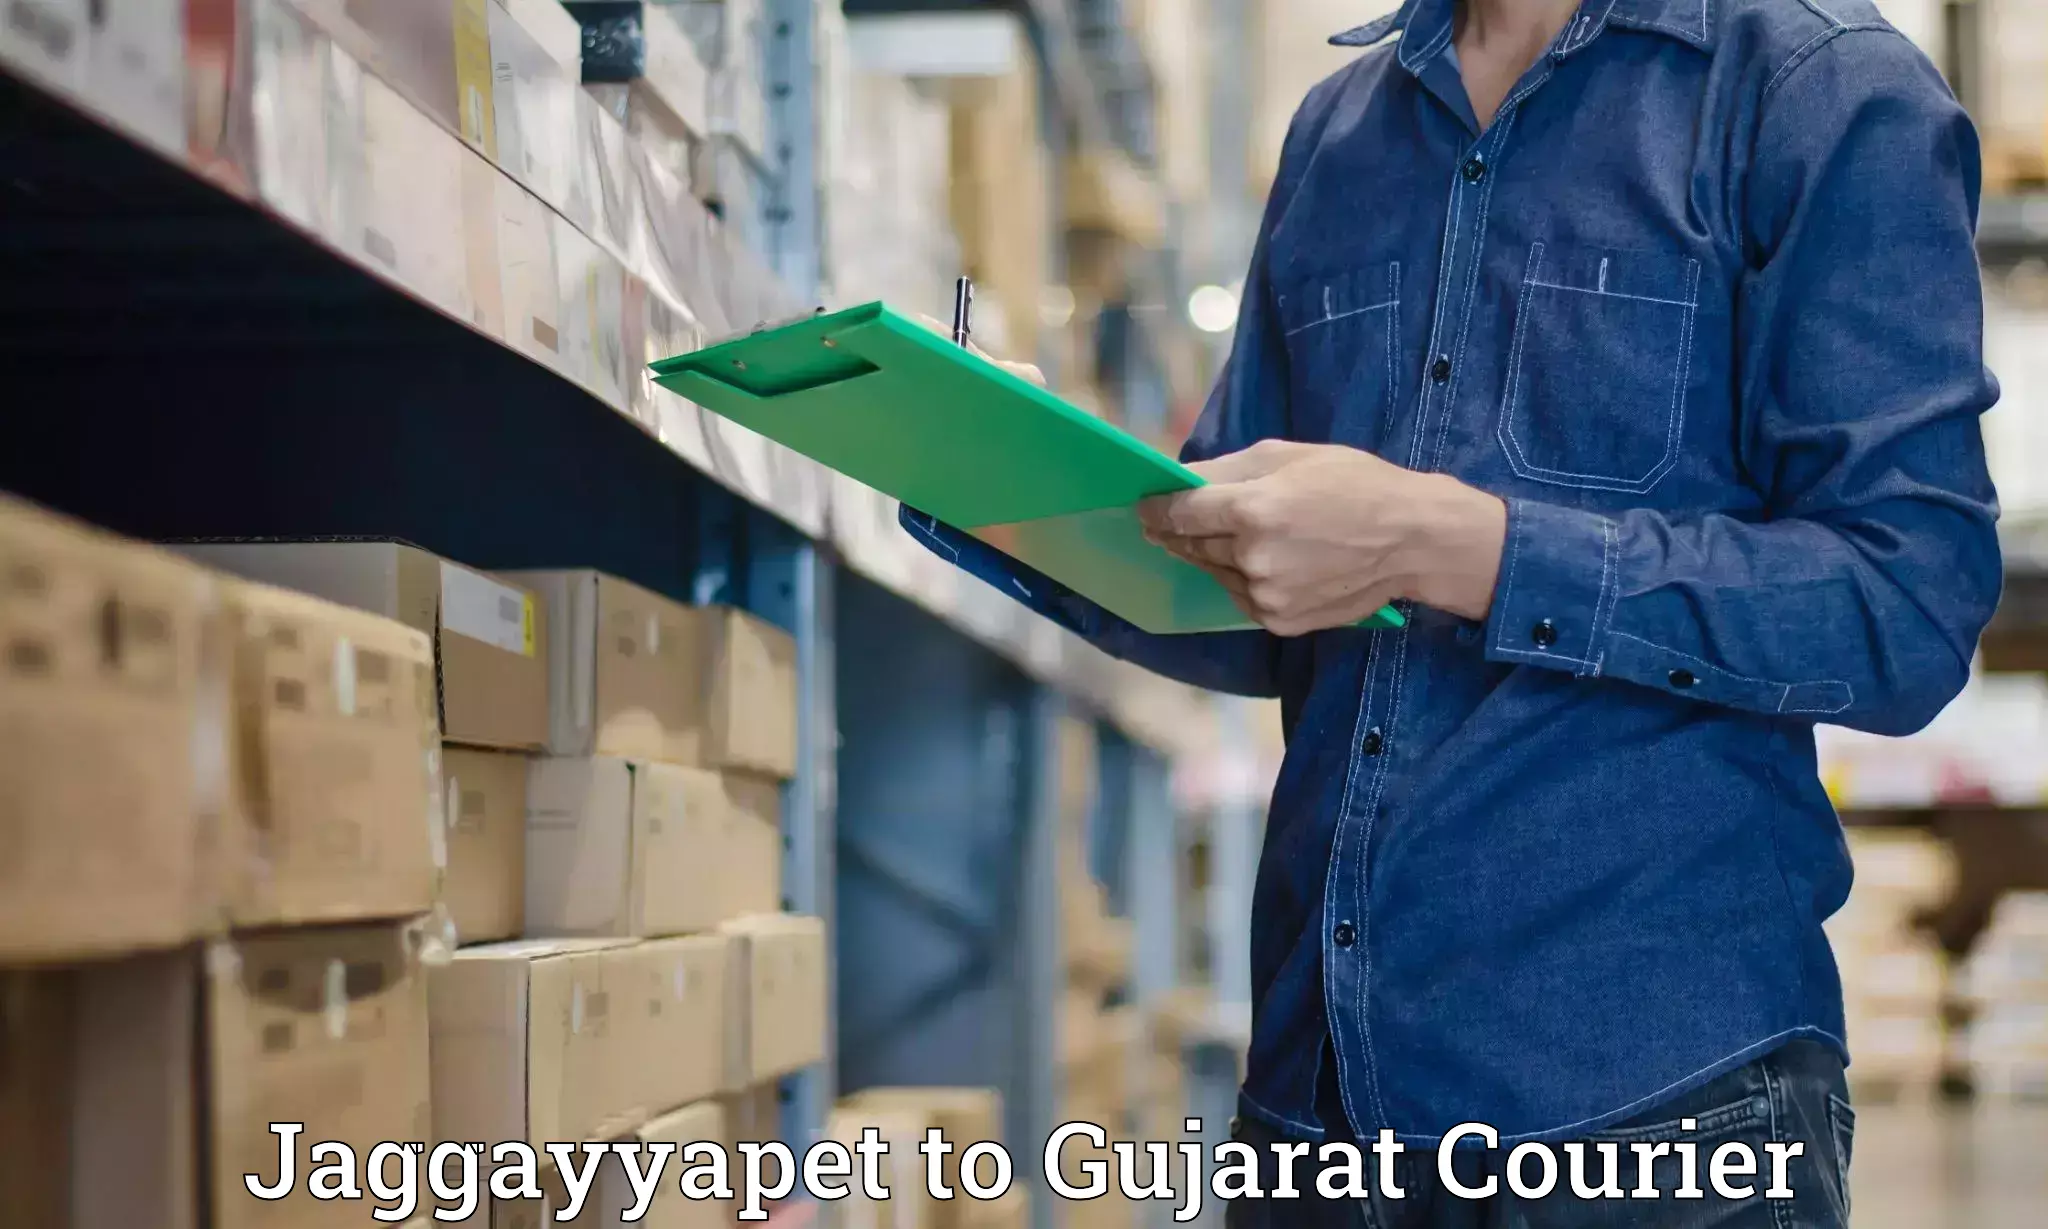 High-speed logistics services Jaggayyapet to Anand Agricultural University